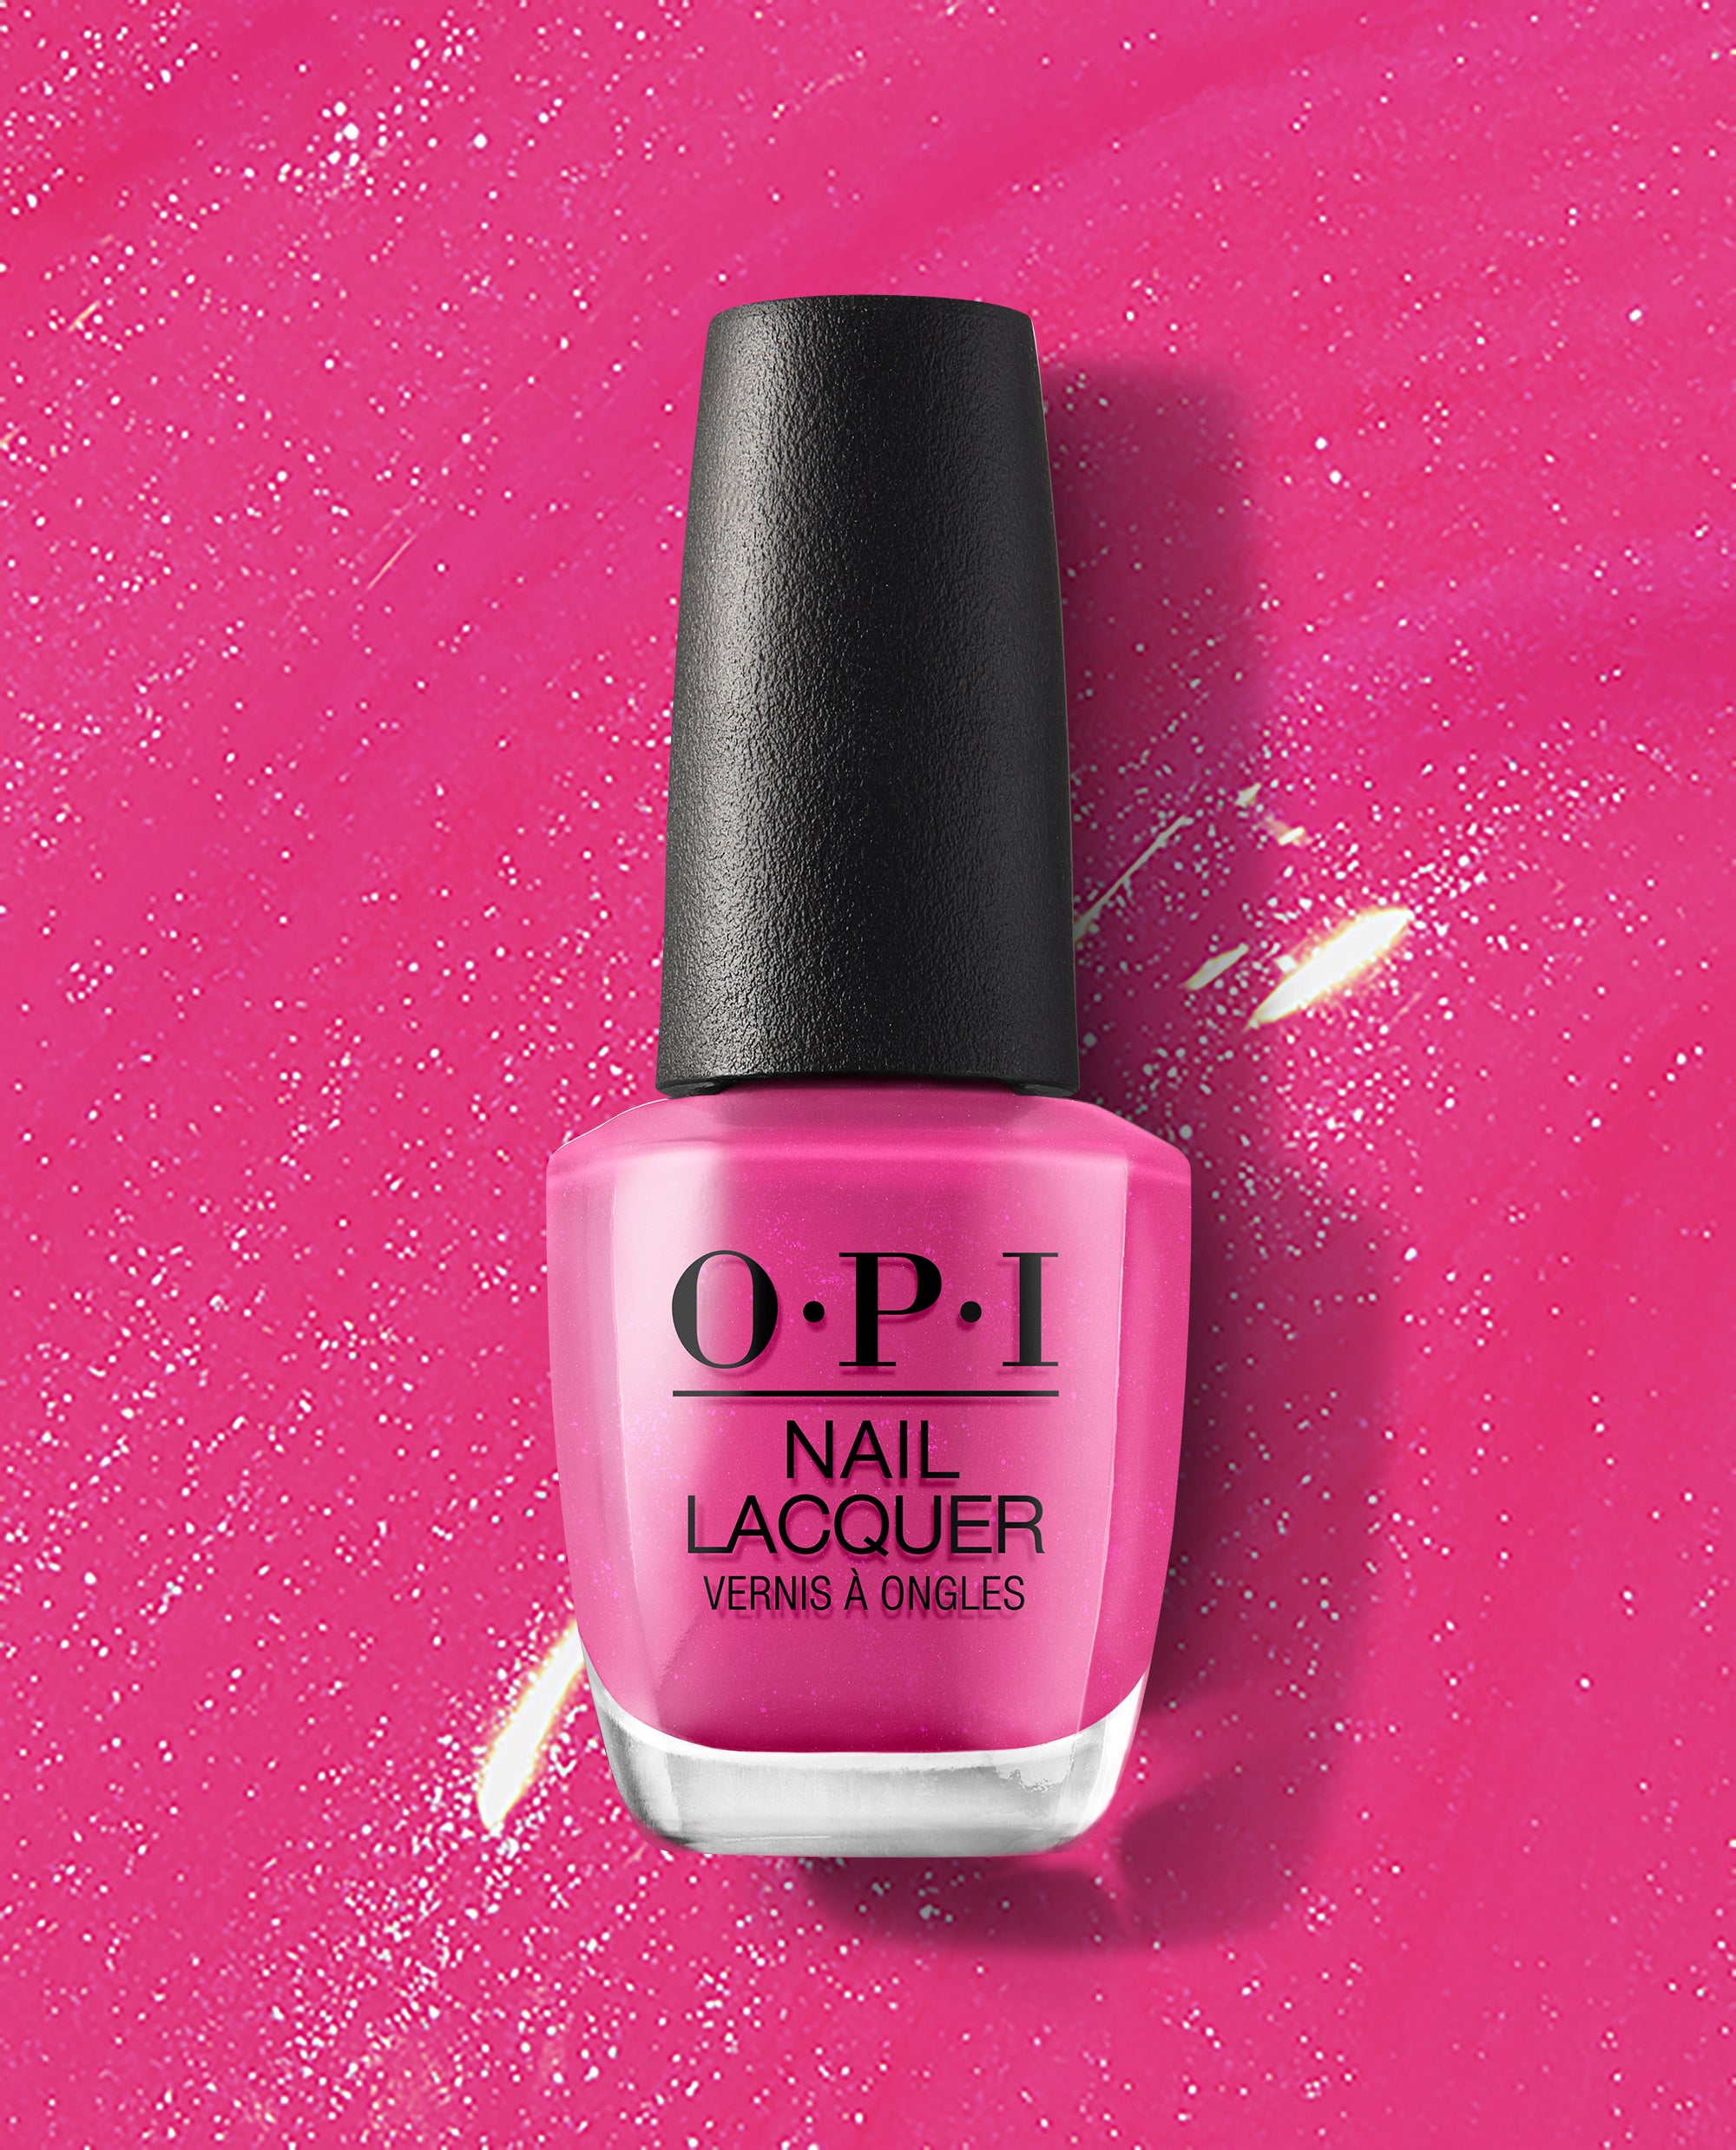 The Best Pink Nail Polish For Every Skin ToneHelloGiggles